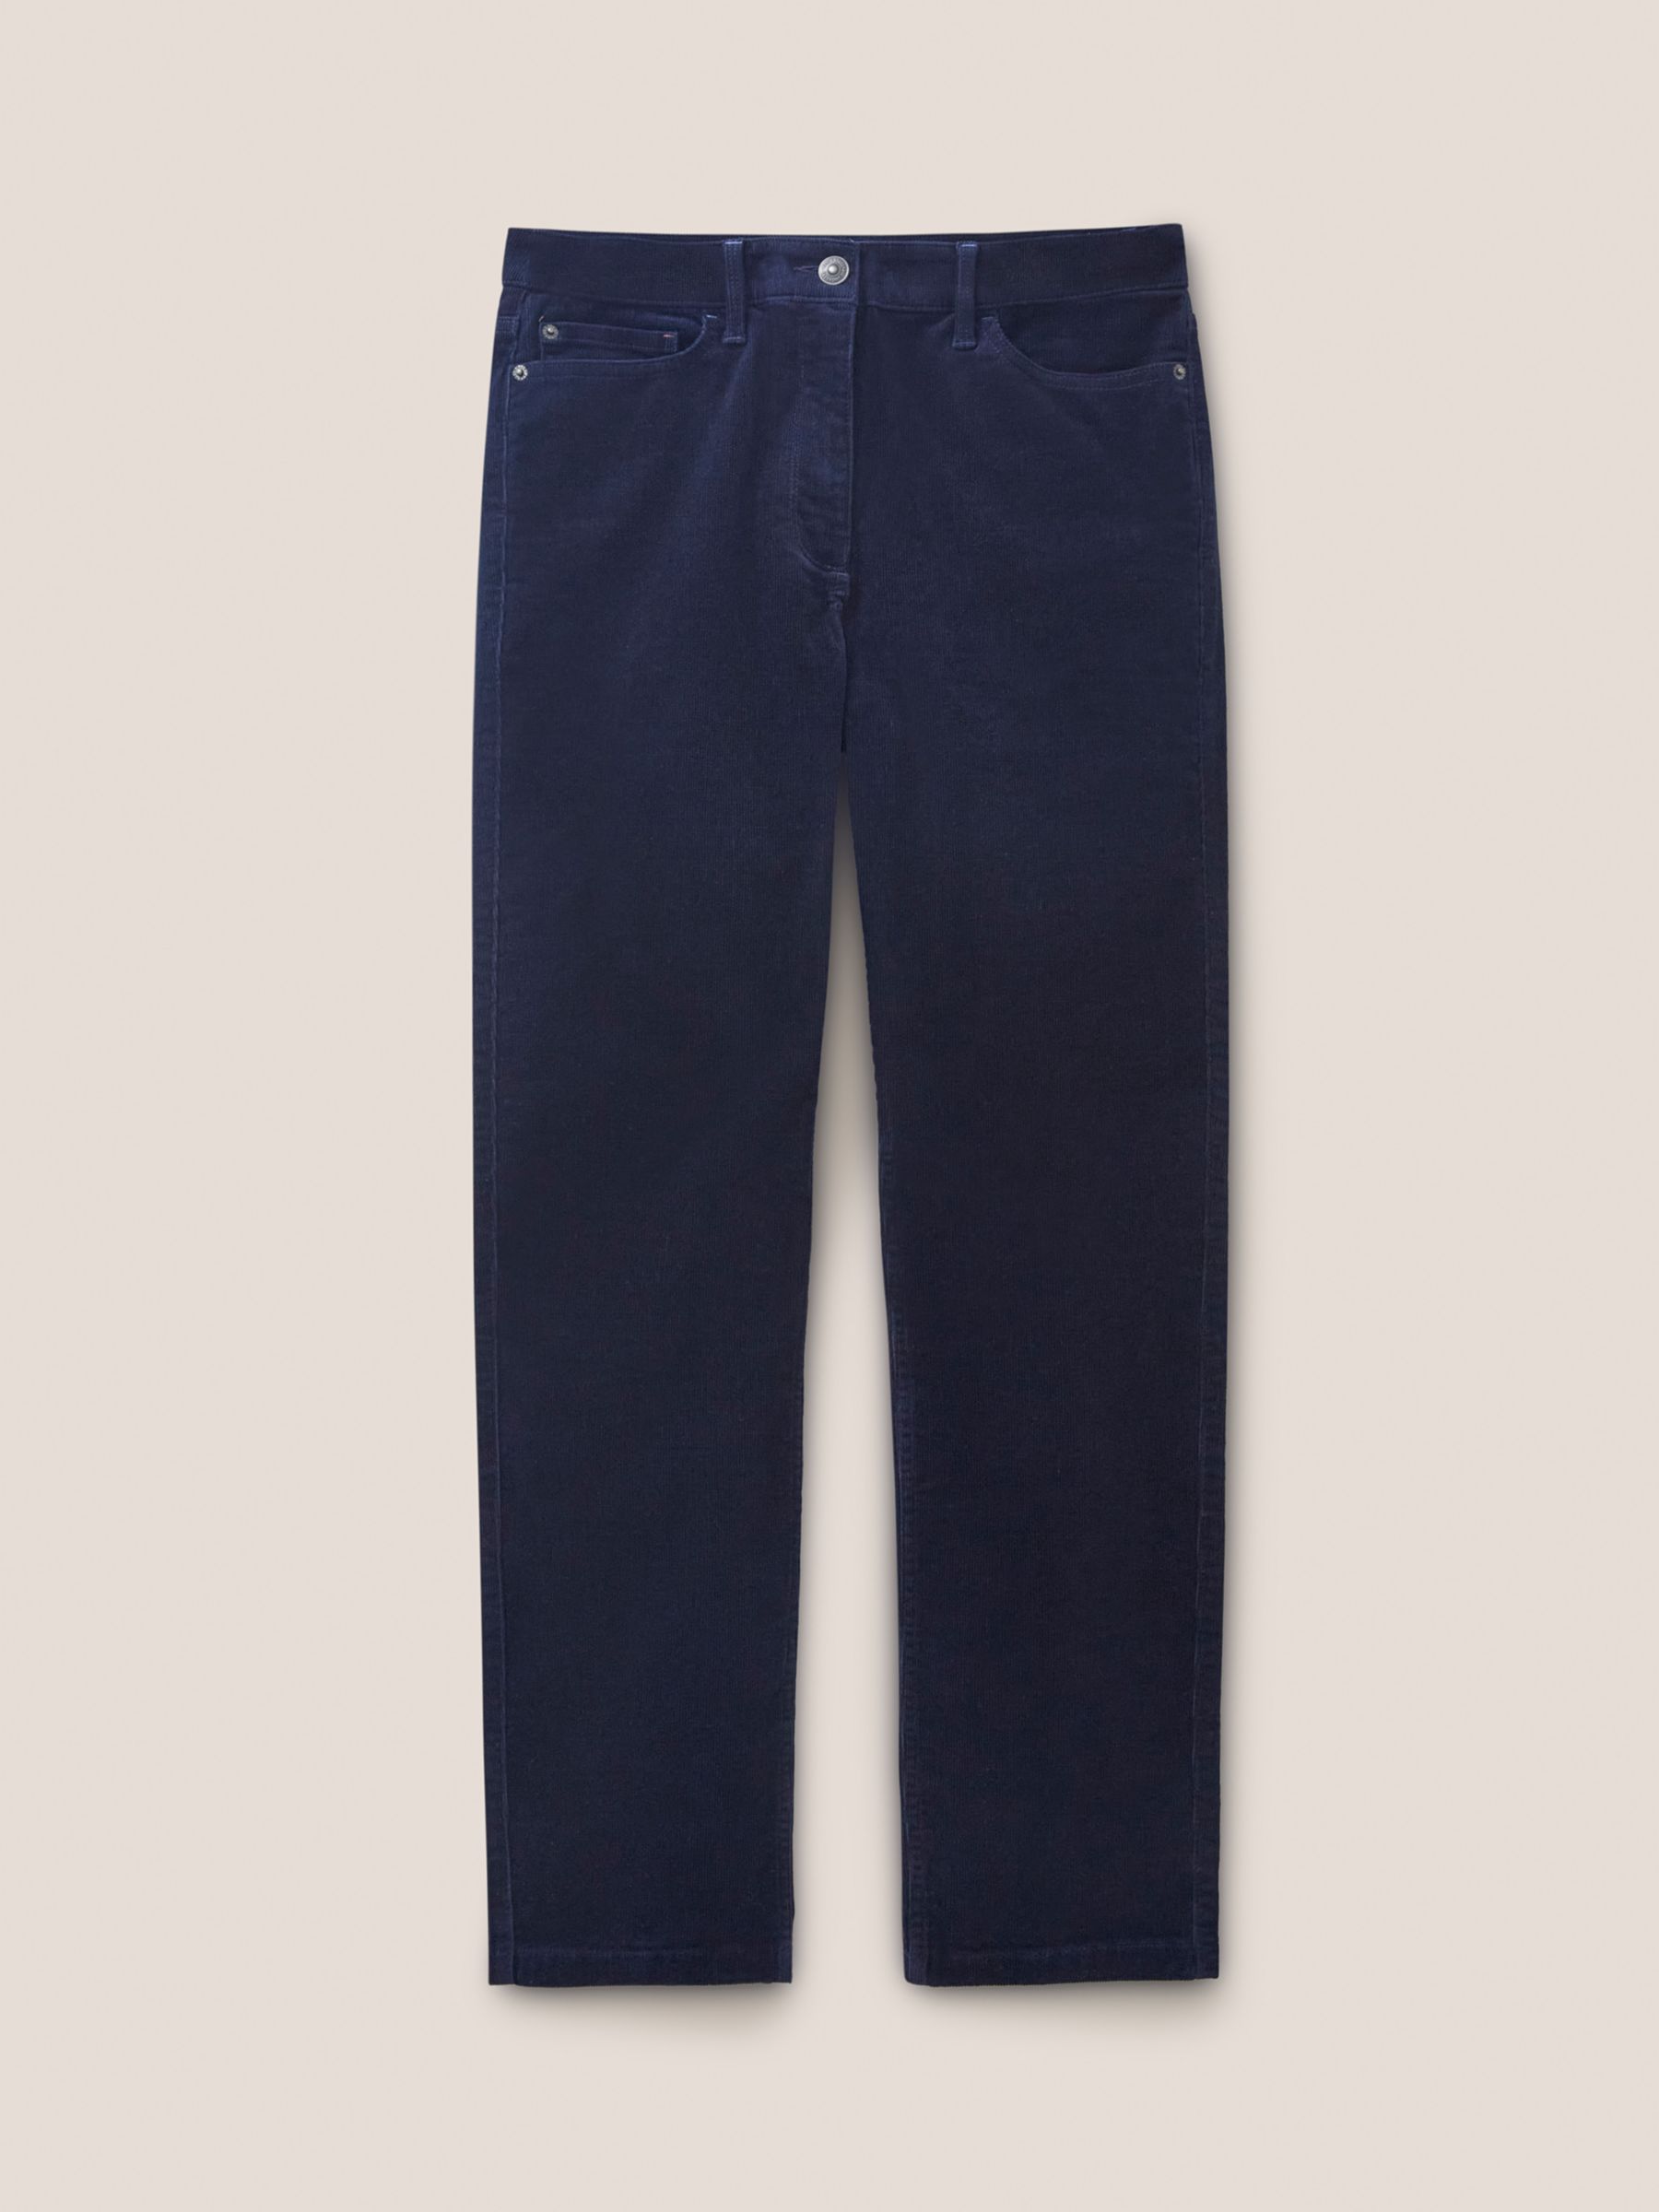 Buy White Stuff Brooke Organic Cotton Straight Cord Trousers Online at johnlewis.com